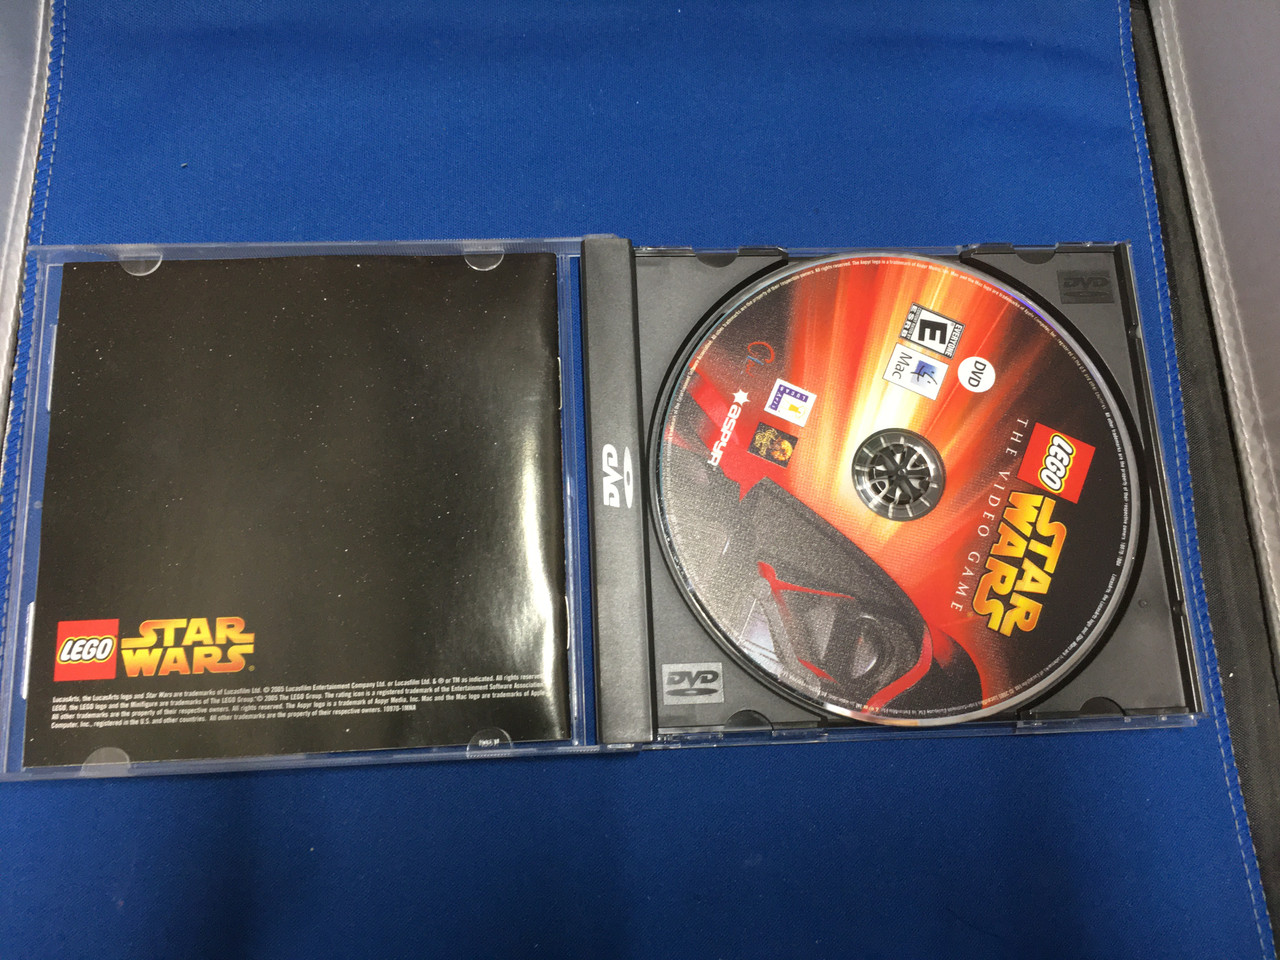 Lego Star Wars - The Video Game for Mac